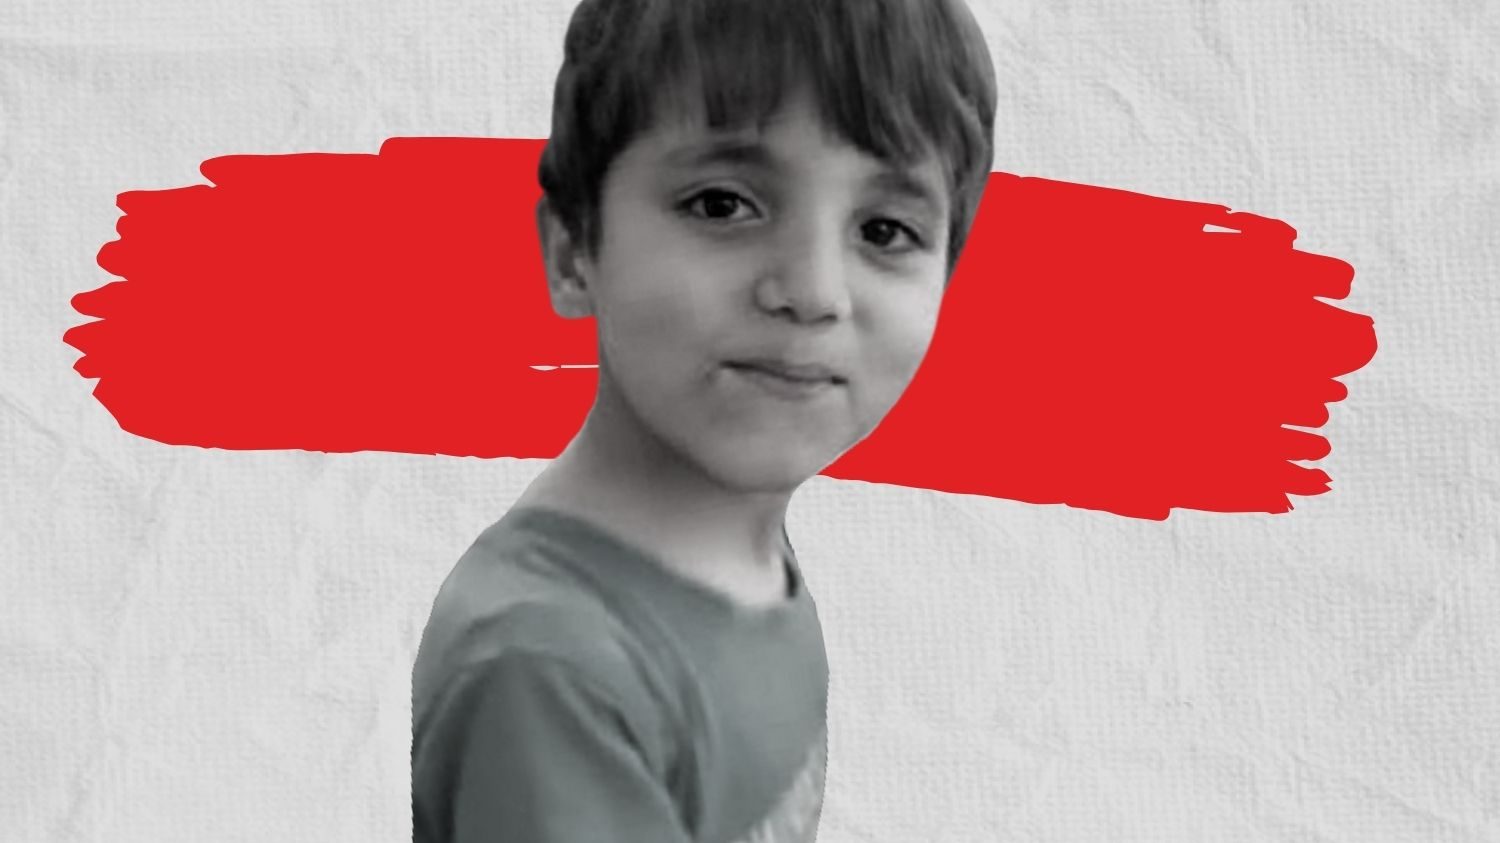 #SaveFawaz: Kidnapping and Torture of Syrian Boy Sparks Outrage as Ransom Deadline Looms Fawaz